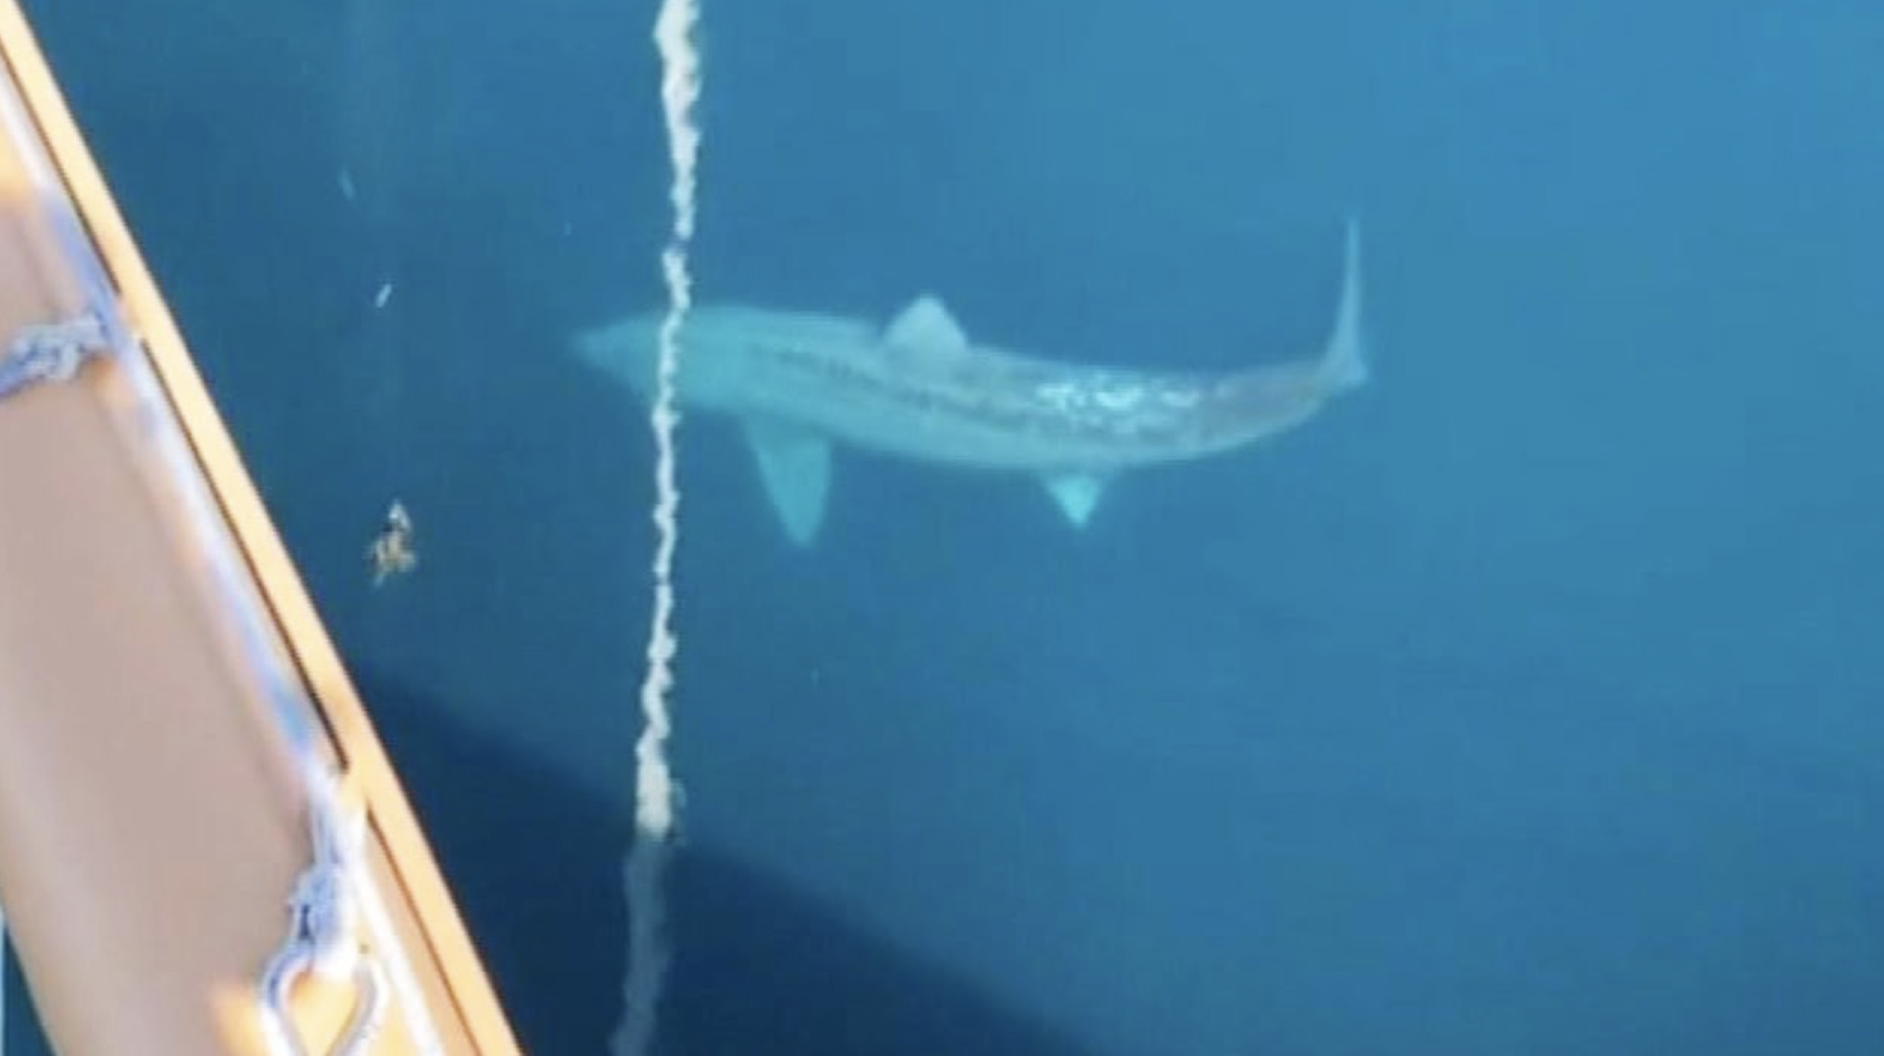 Alex Albrecht, a marine biodiversity student, was part of a group of researchers on a ship about 100 miles off the coast of Wools Hole when they spotted a massive shark.